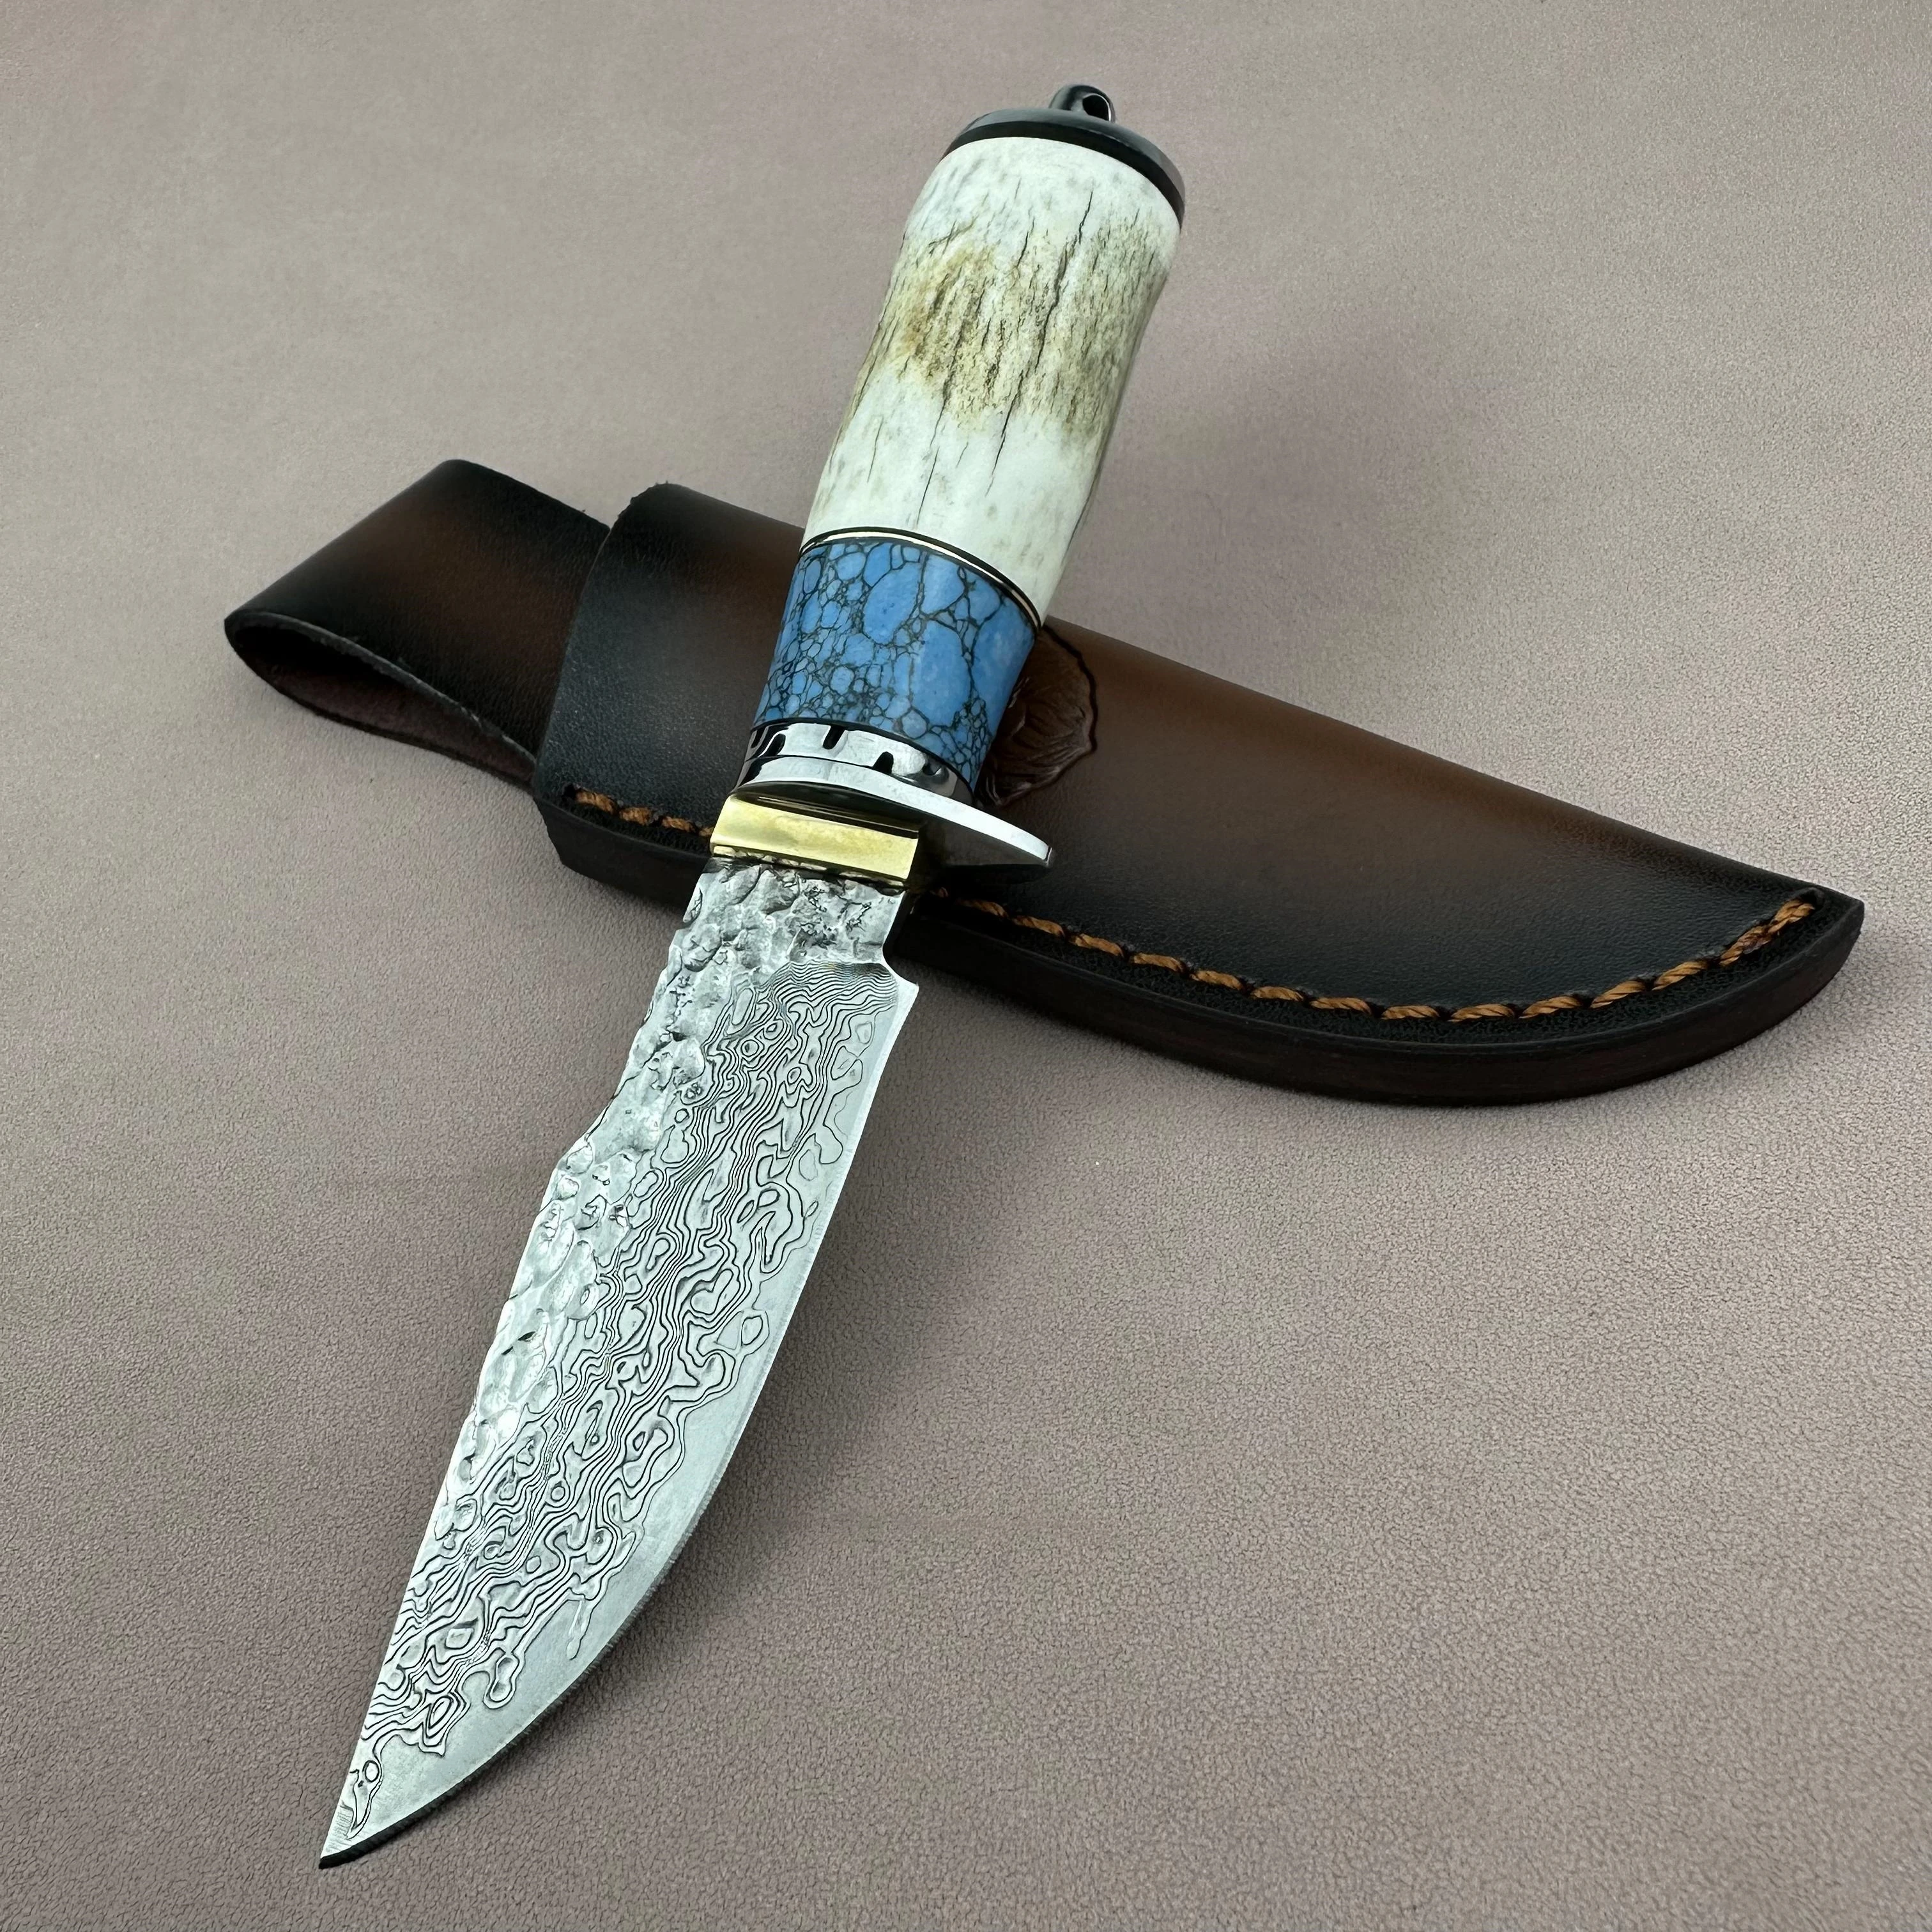 

Excellent Handmade Knife VG10 Damscus Blade Antler Handle With Brass Head Premiun Leather Sheath High End Perfect Collection